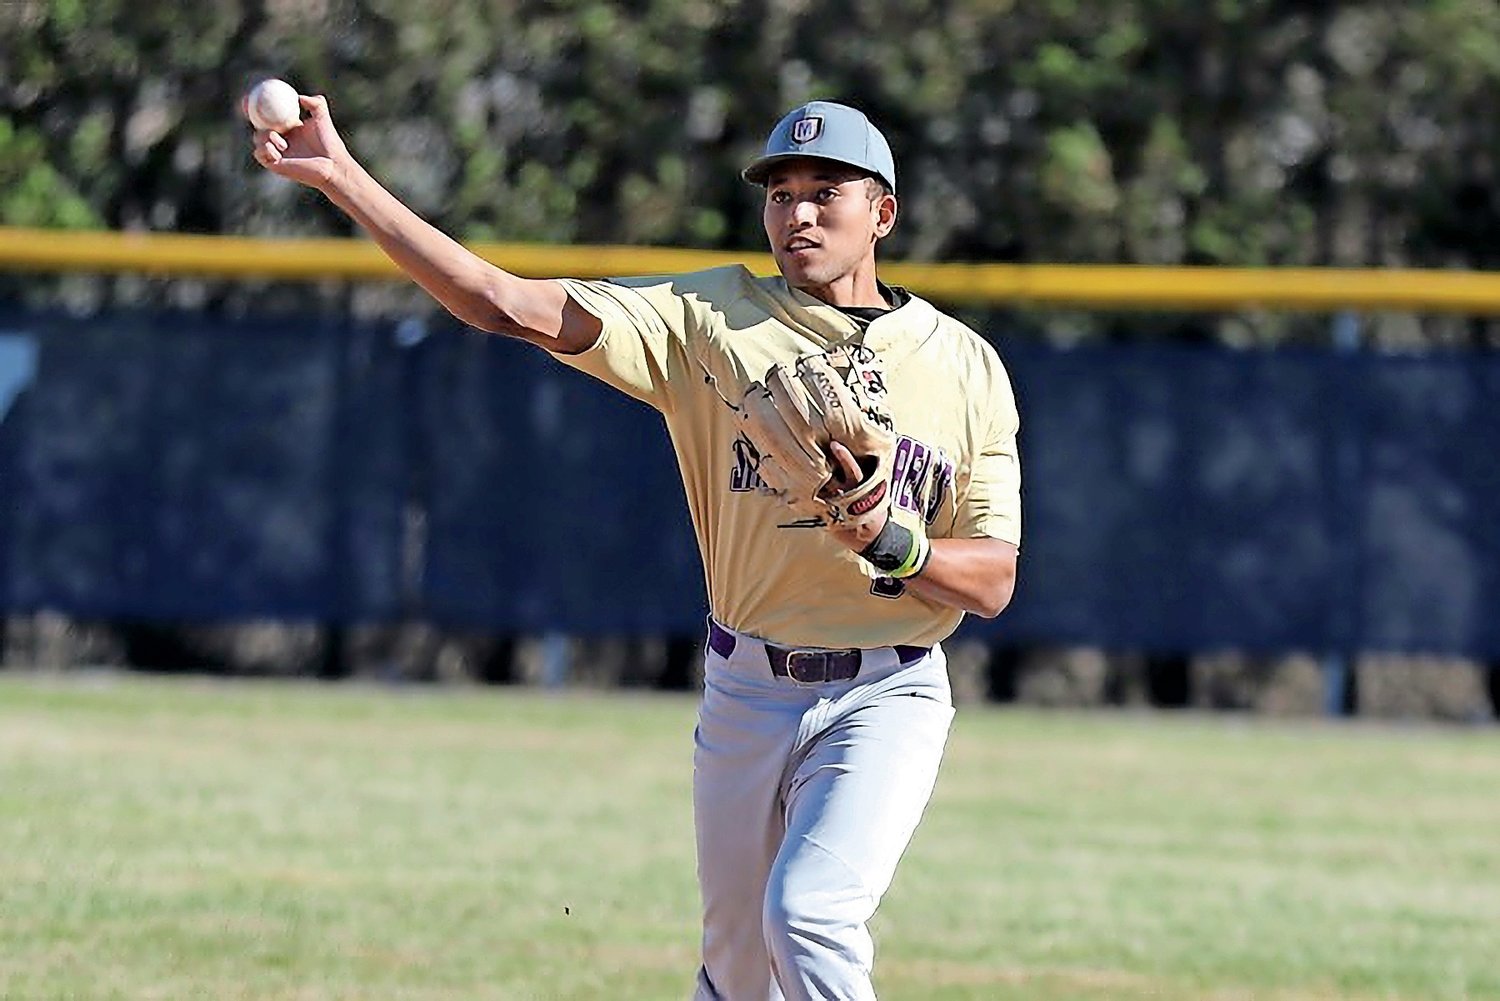 Ulysses Luciano, a Riverdale/Kingsbridge Academy alumnus, makes a play at second based during Saint Michael’s College’s loss to 15th ranked Franklin Pierce University last weekend. Luciano leads the team in hits with 12 so far early in the season.